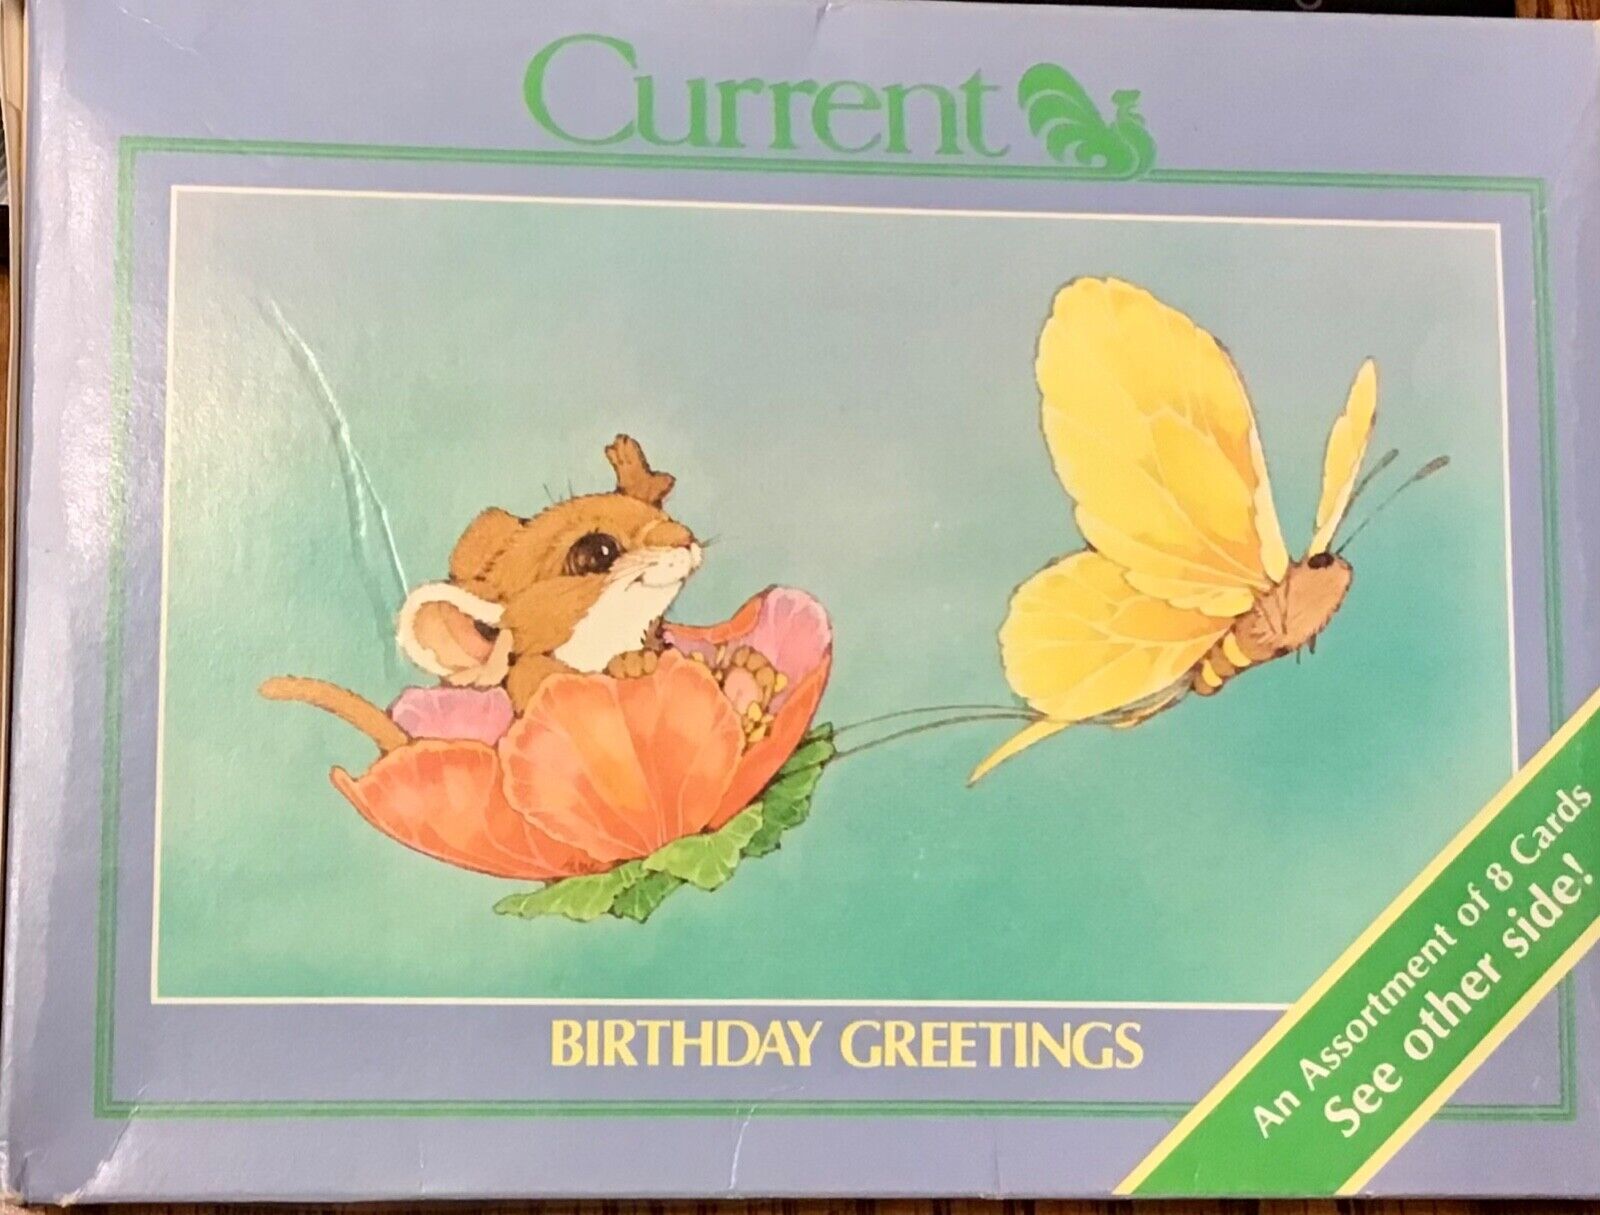 Vintage 1982 Current Critters Greeting Note Cards BIRTHDAY Mouse Unused in Box